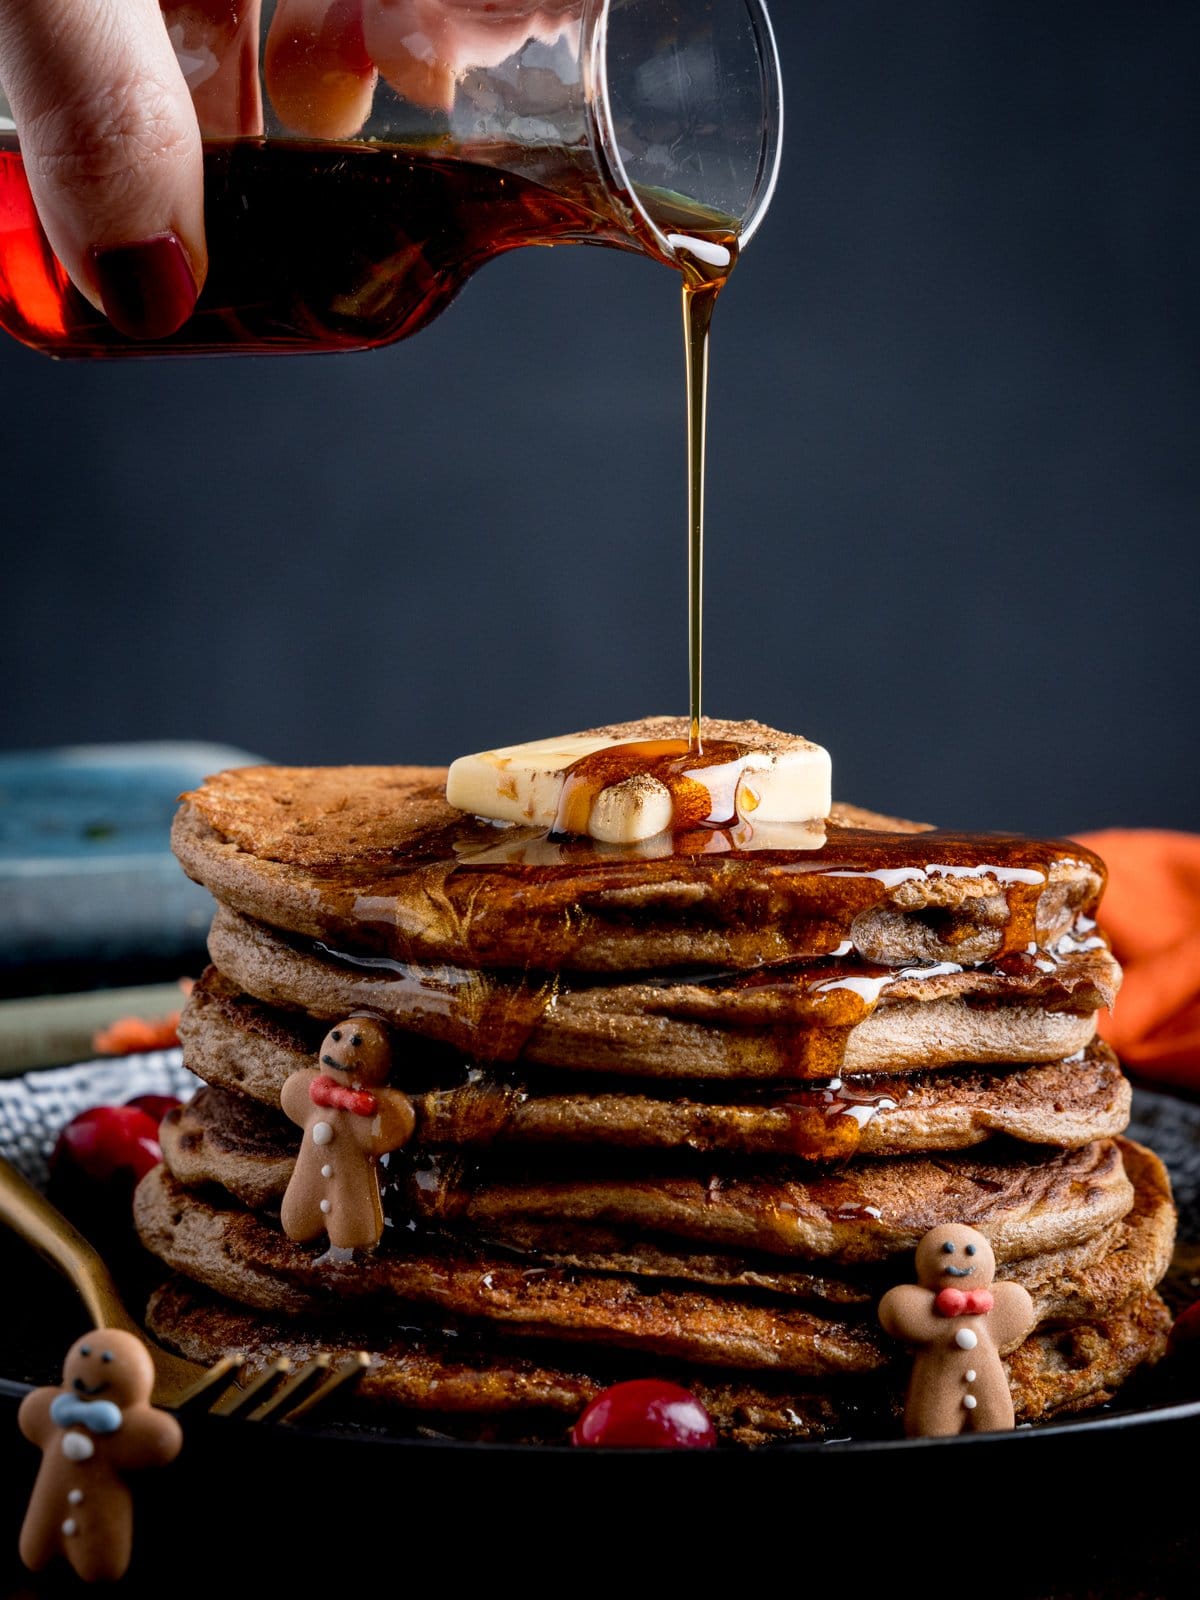 Maple syrup being poured over a large stack of gingerbread pancakes with mini gingerbread men on the plate along with some fresh cranberries.